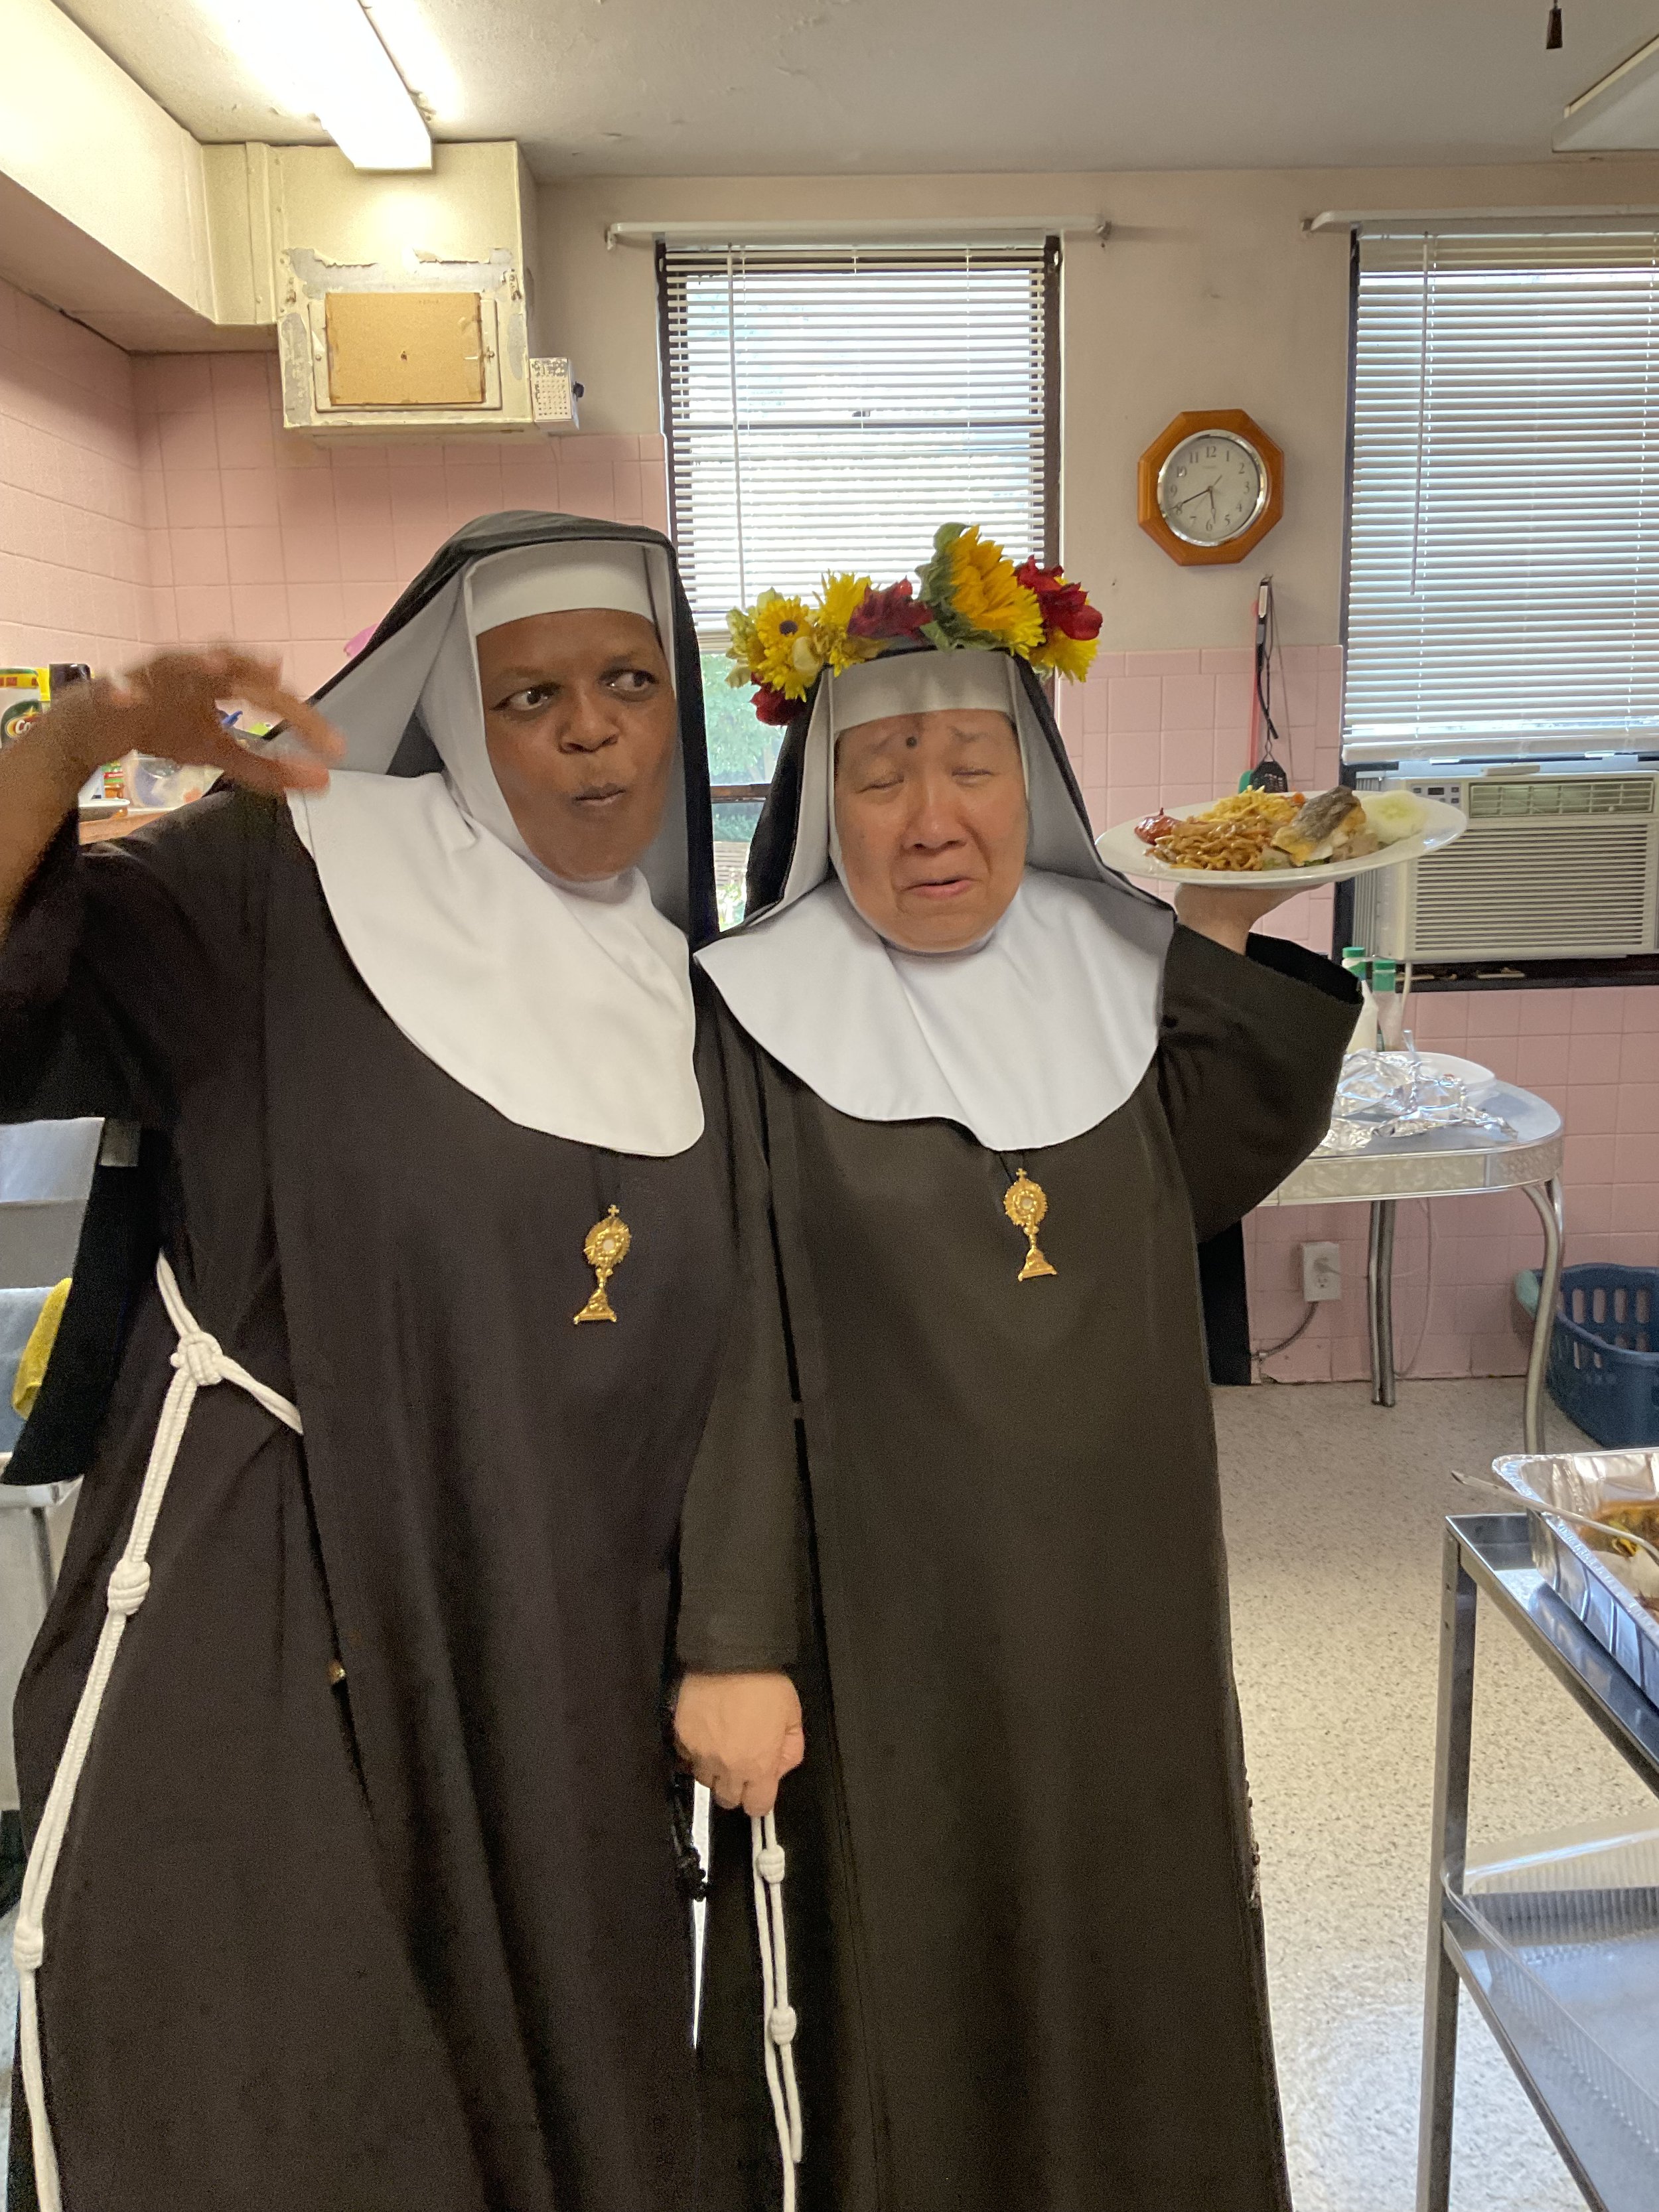 I have absolutely no idea what this face of both Sr. Mary Agnes and Mother Mary Gertrude is all about